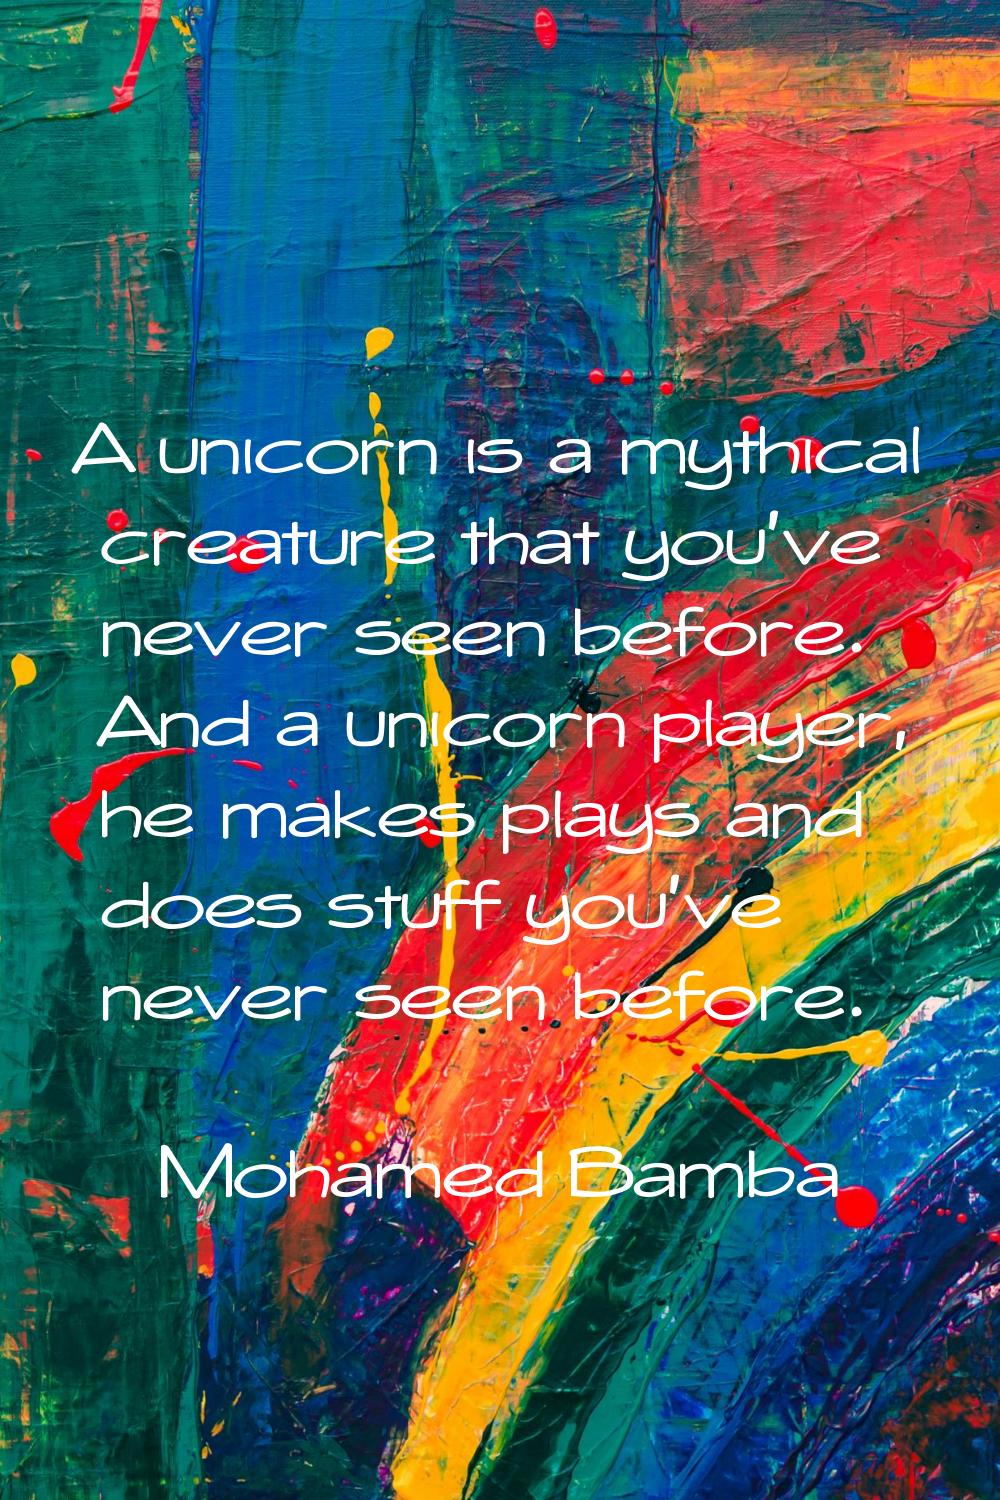 A unicorn is a mythical creature that you've never seen before. And a unicorn player, he makes play